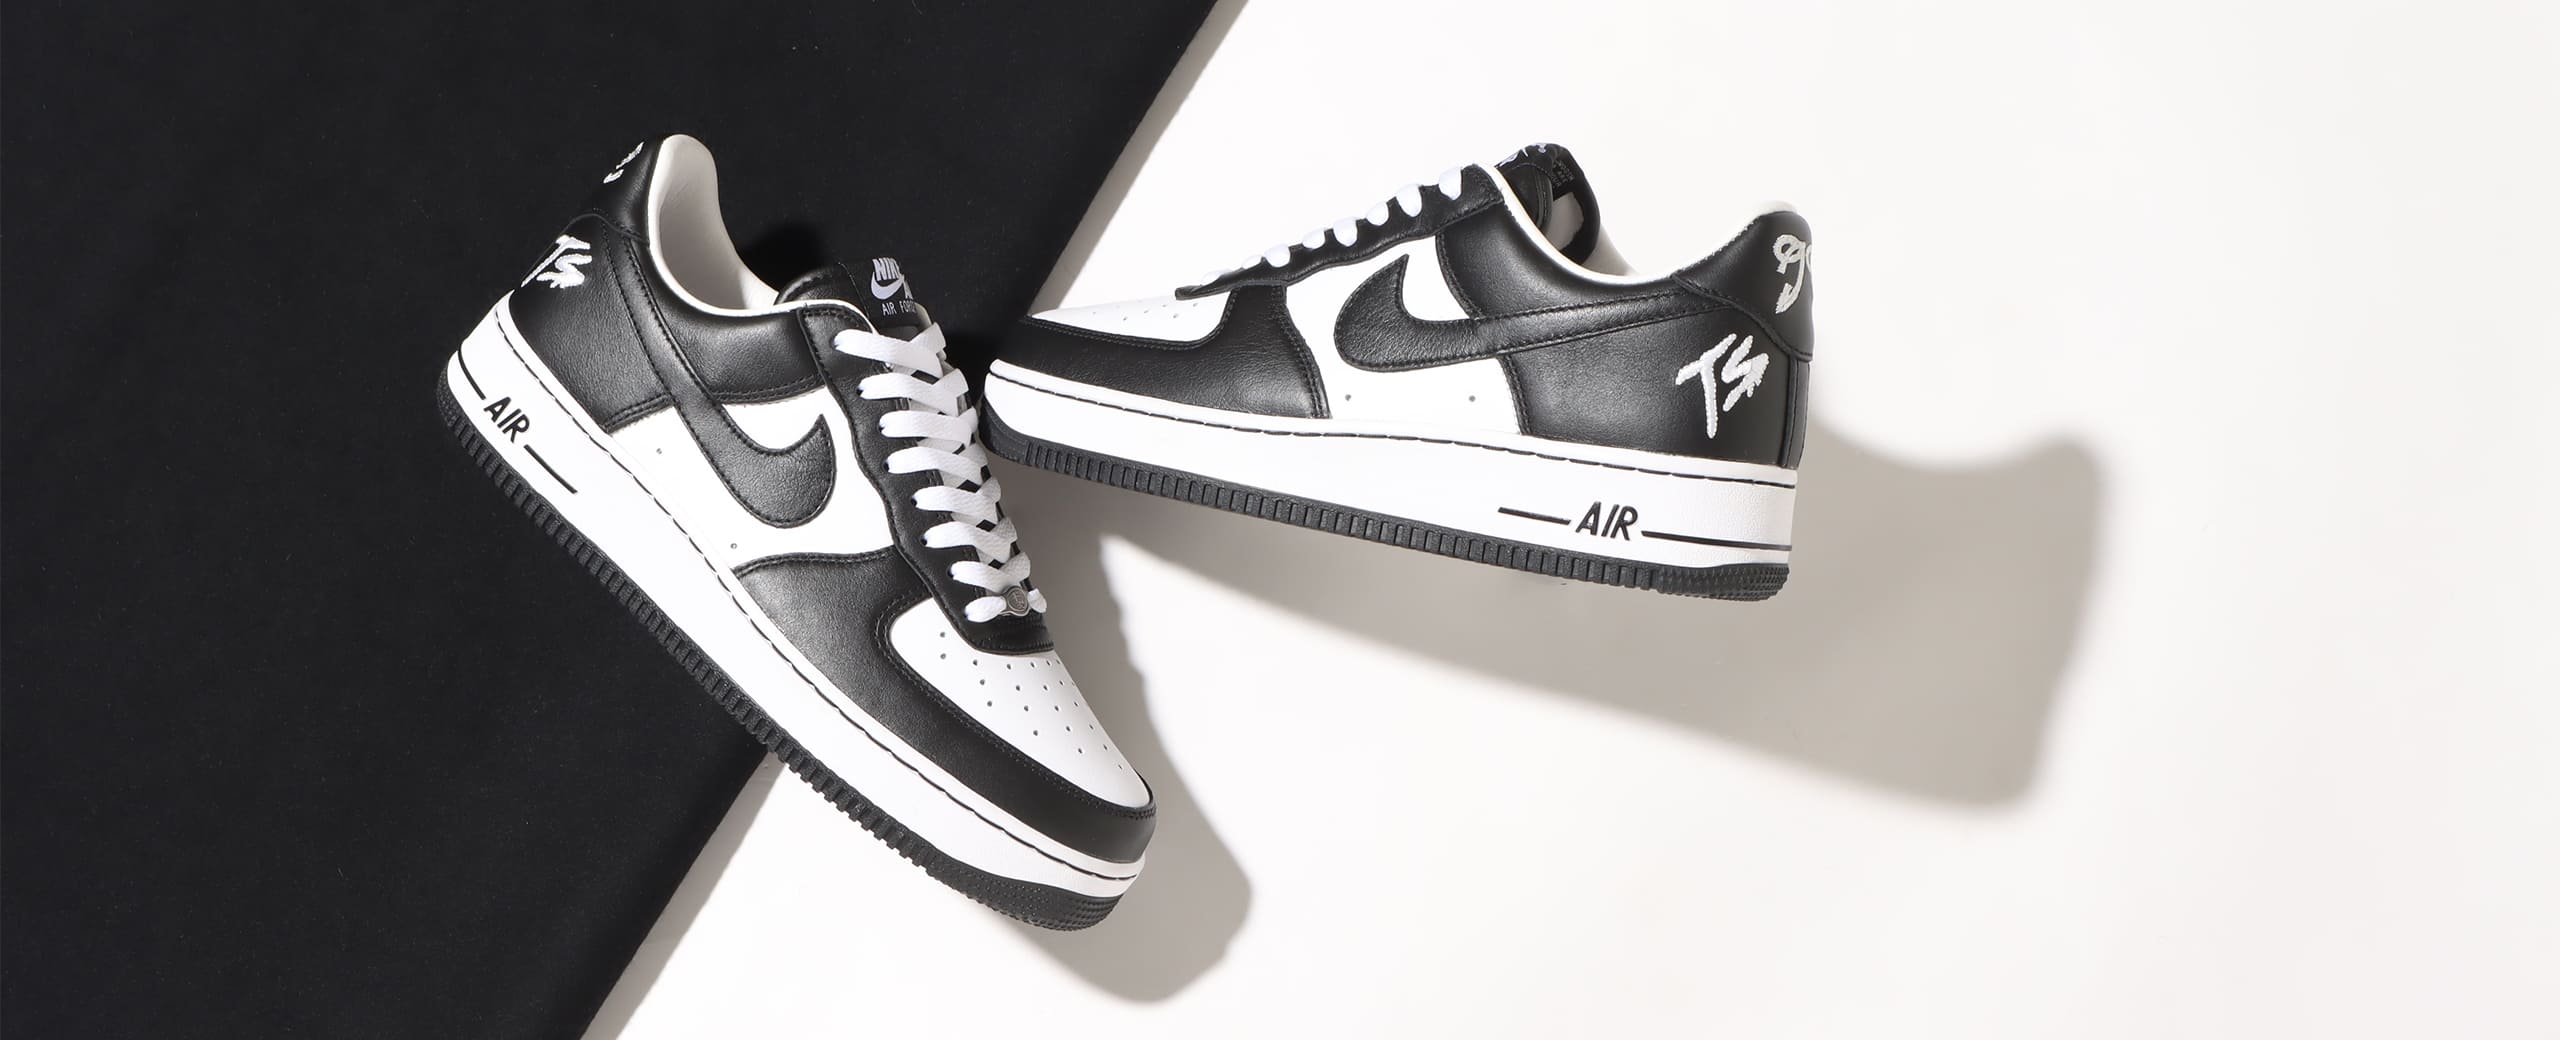 NIKE AIR FORCE1 LOW QS TS値引き交渉はご遠慮ください